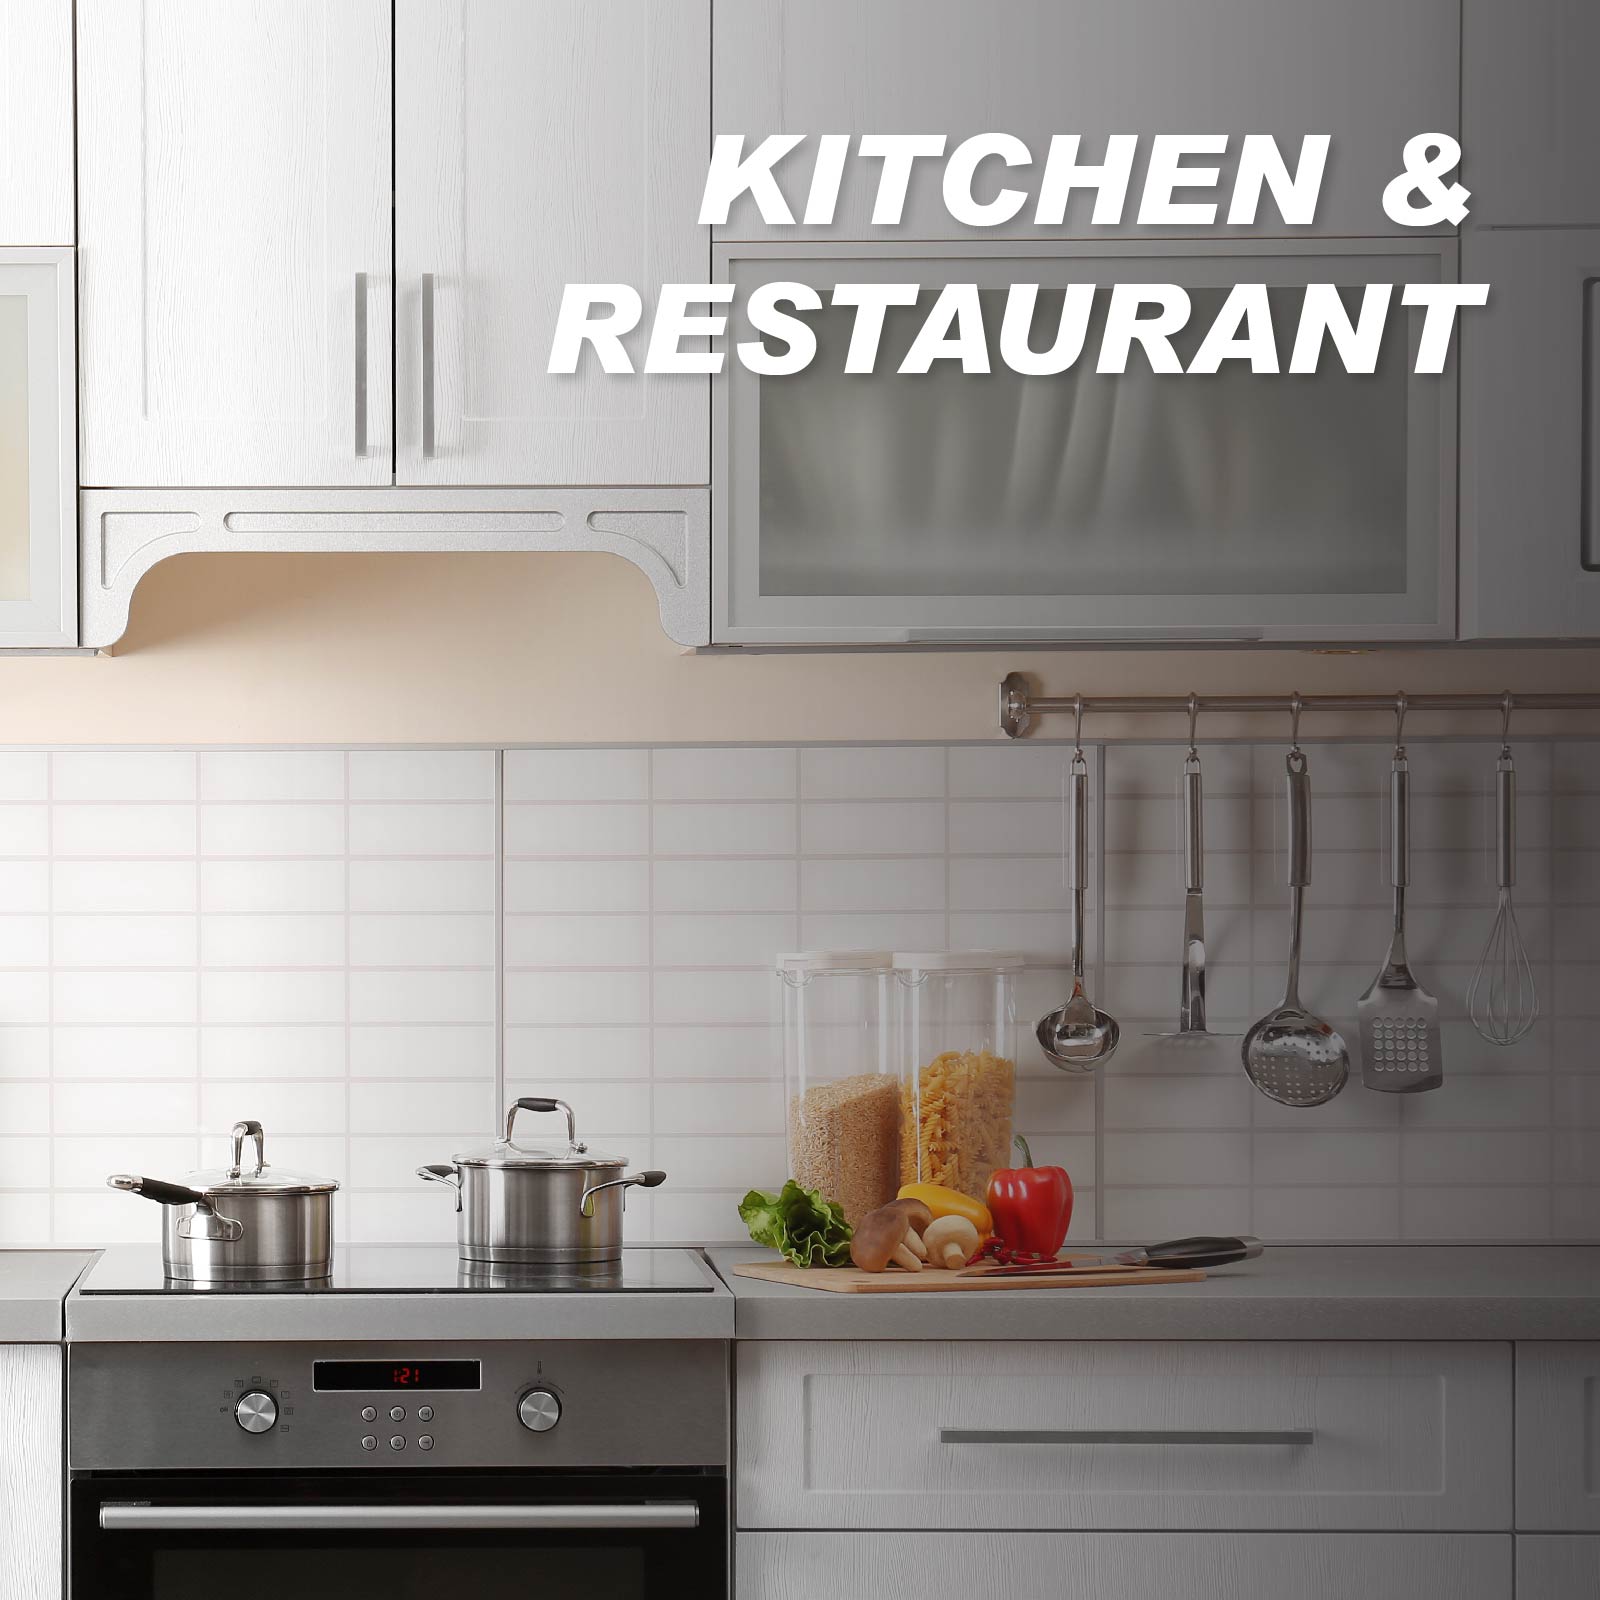 Kitchen & Restaurant Cleaning Products